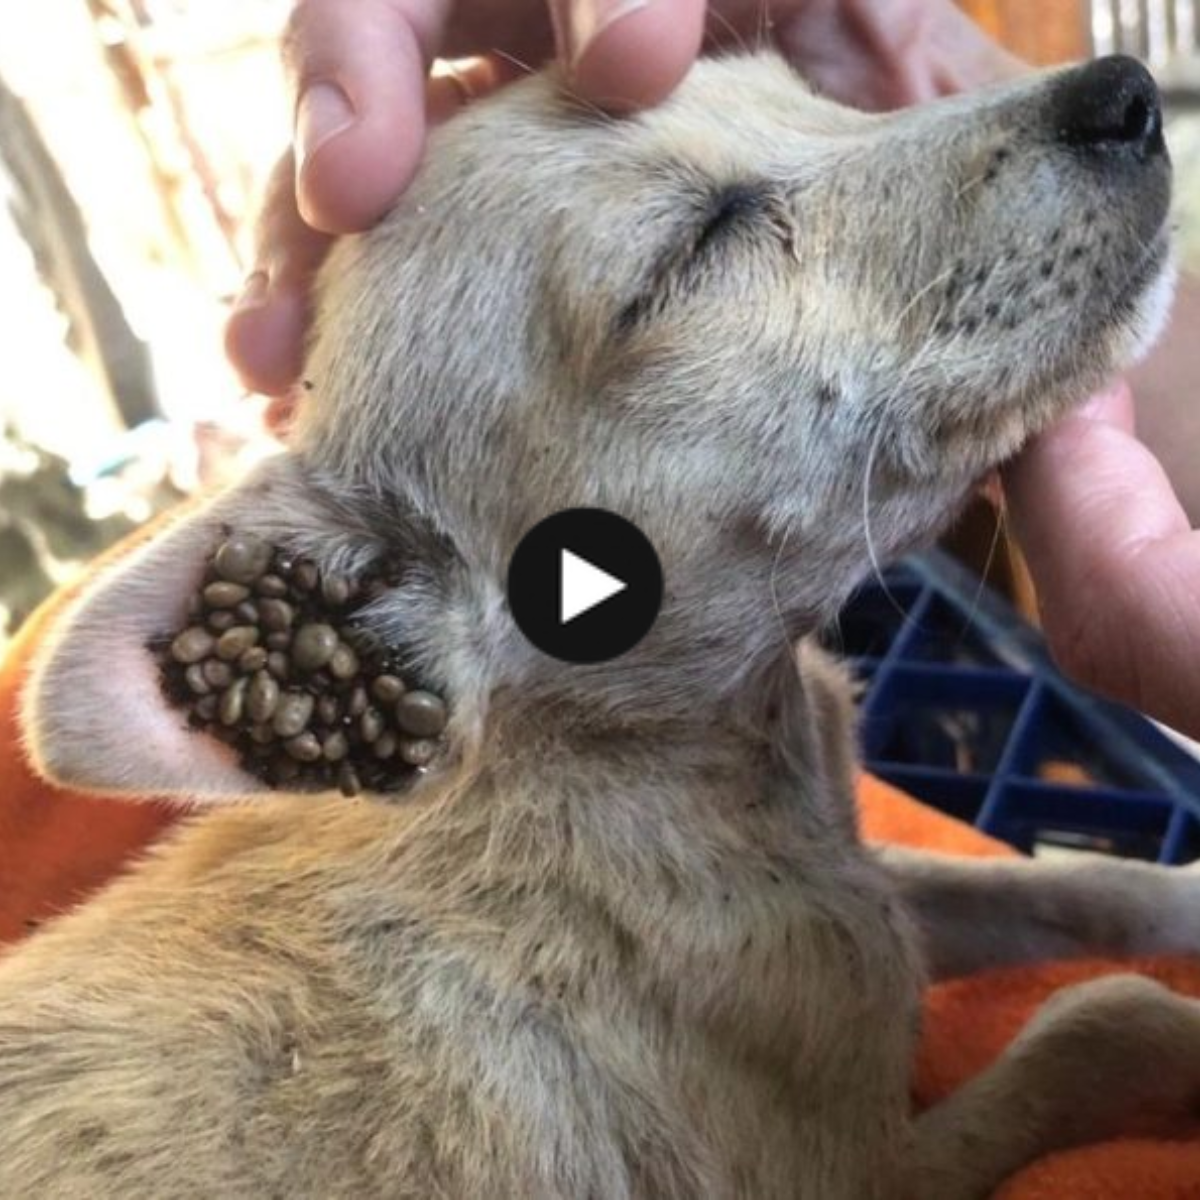 A moving path of healing and hope is revealed amid the desperation of a small puppy whose ears have been destroyed by severe parasites.